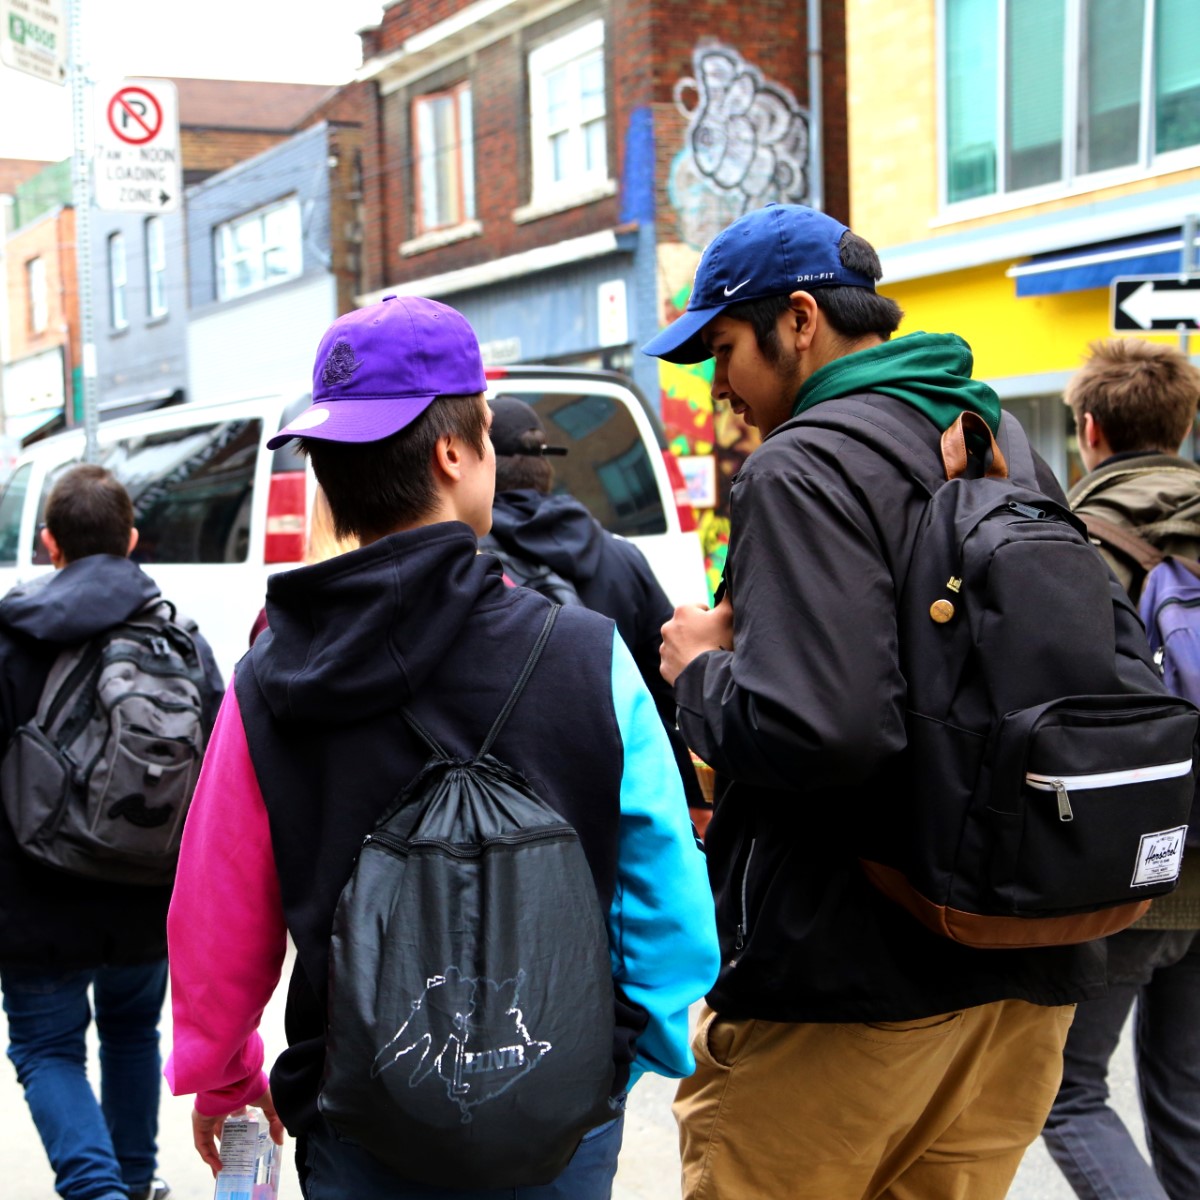 2 teen boys talking during Kensington market tour on Youth Exchanges Canada exchange. Photo by Sarah Cowan.